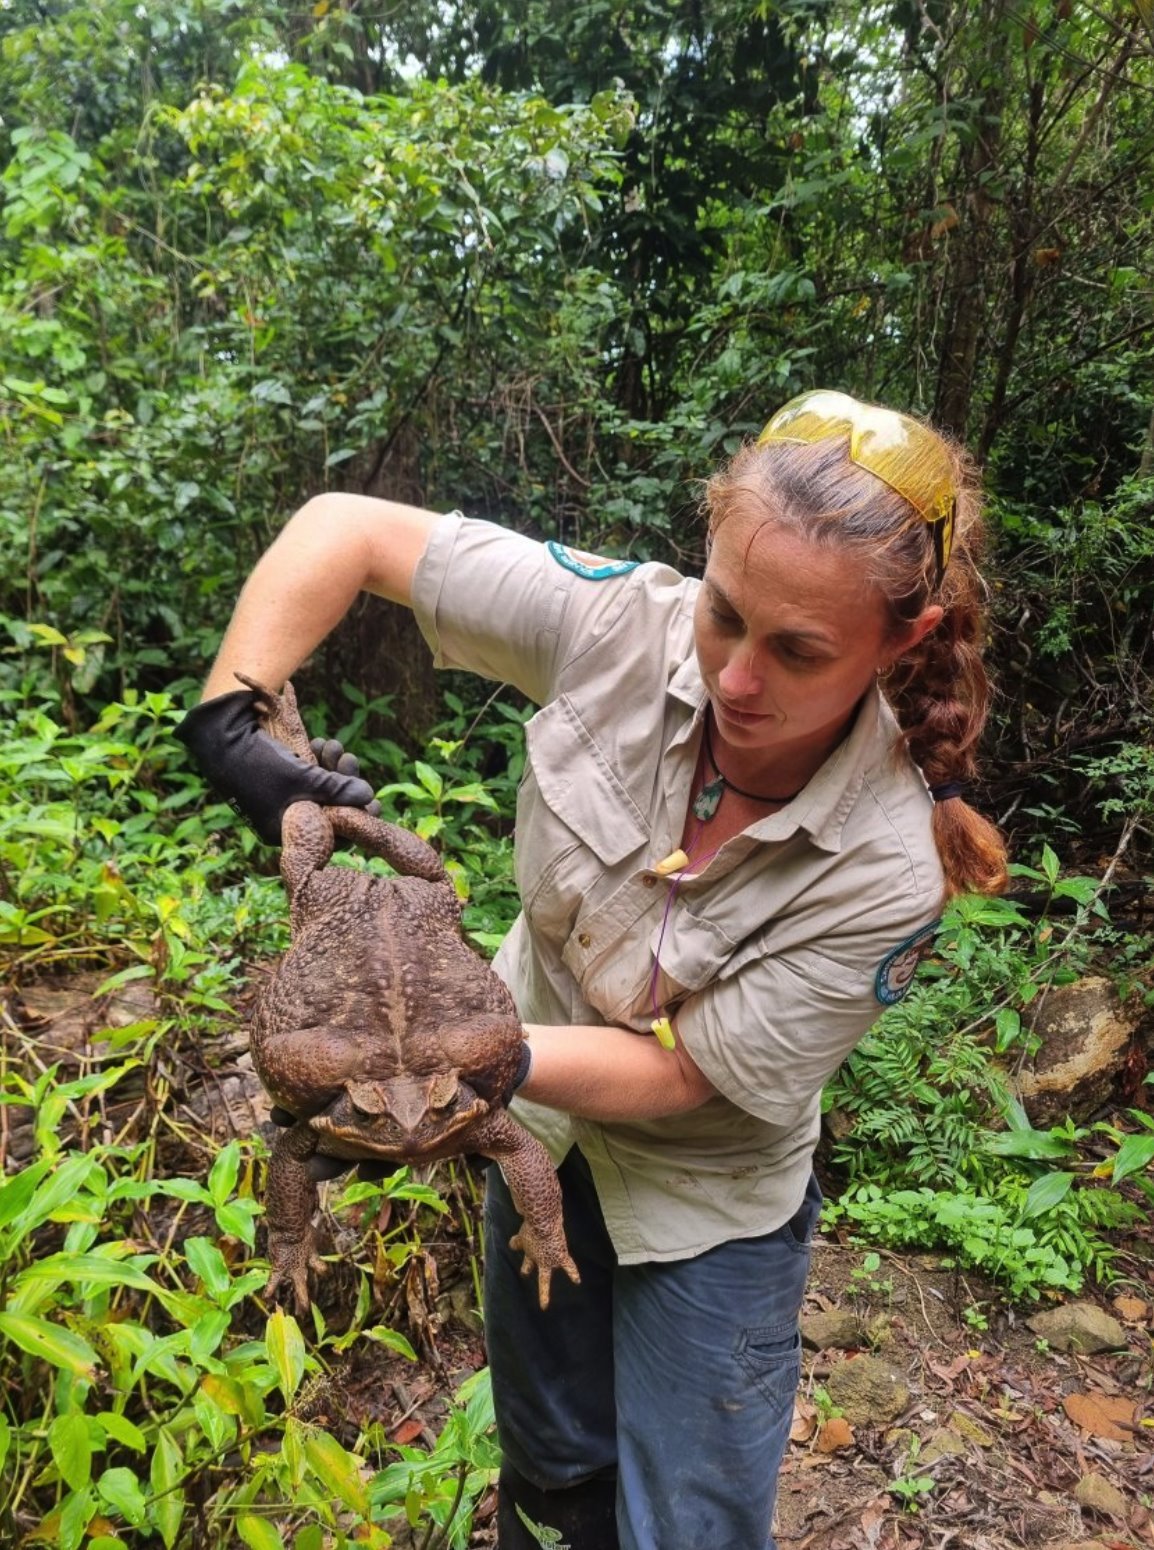 Park ranger Kylee Gray holding the giant toad surrounded by foliage